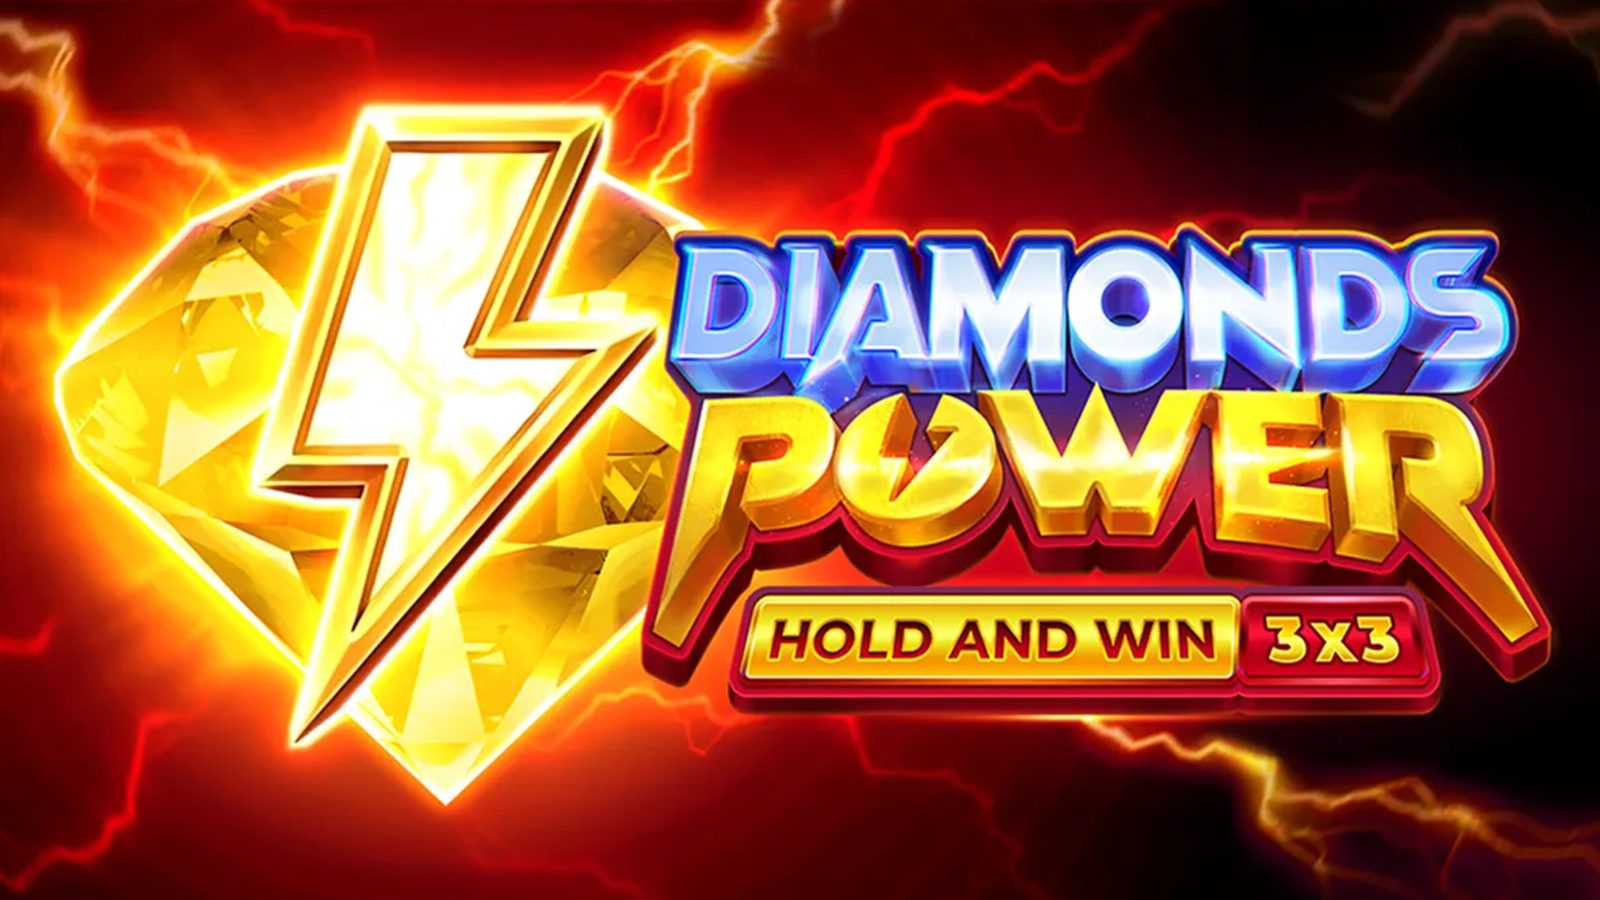 Playson - Diamonds Power Hold and Win